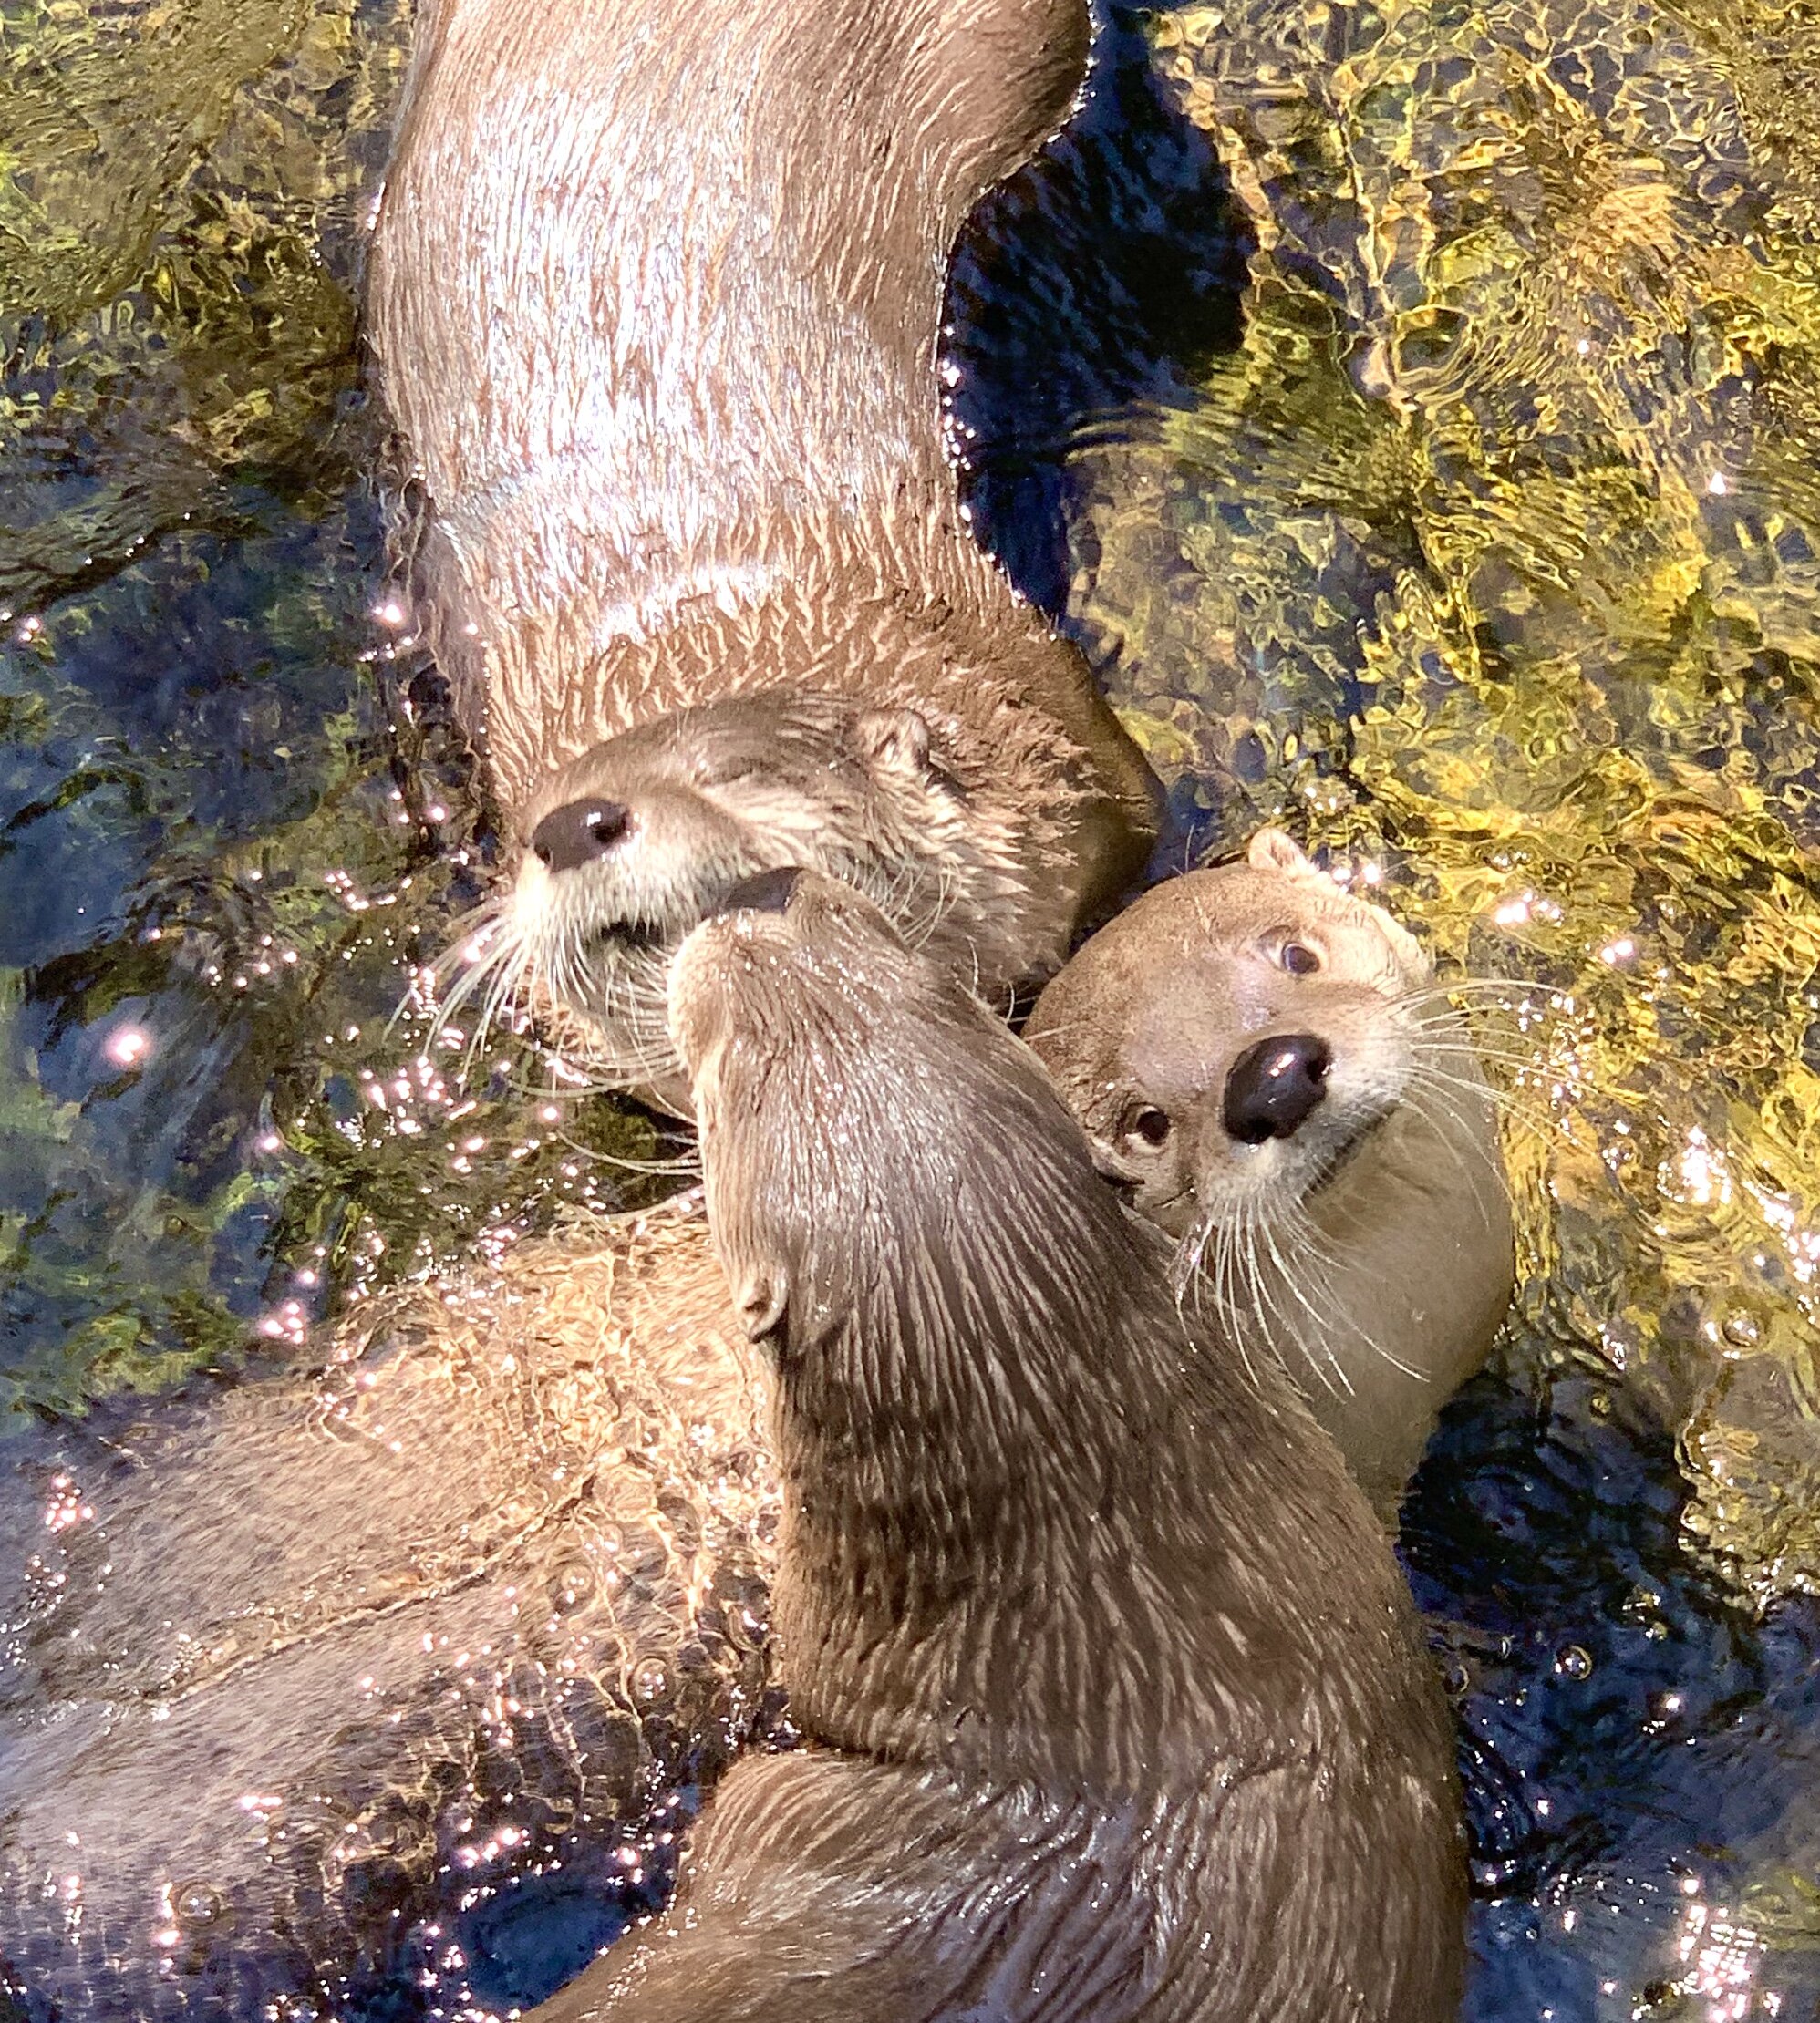  We visited the highly recommended  High Desert Museum  featuring wildlife, history and art of the western high desert. The otters were a fun feature. &nbsp; 